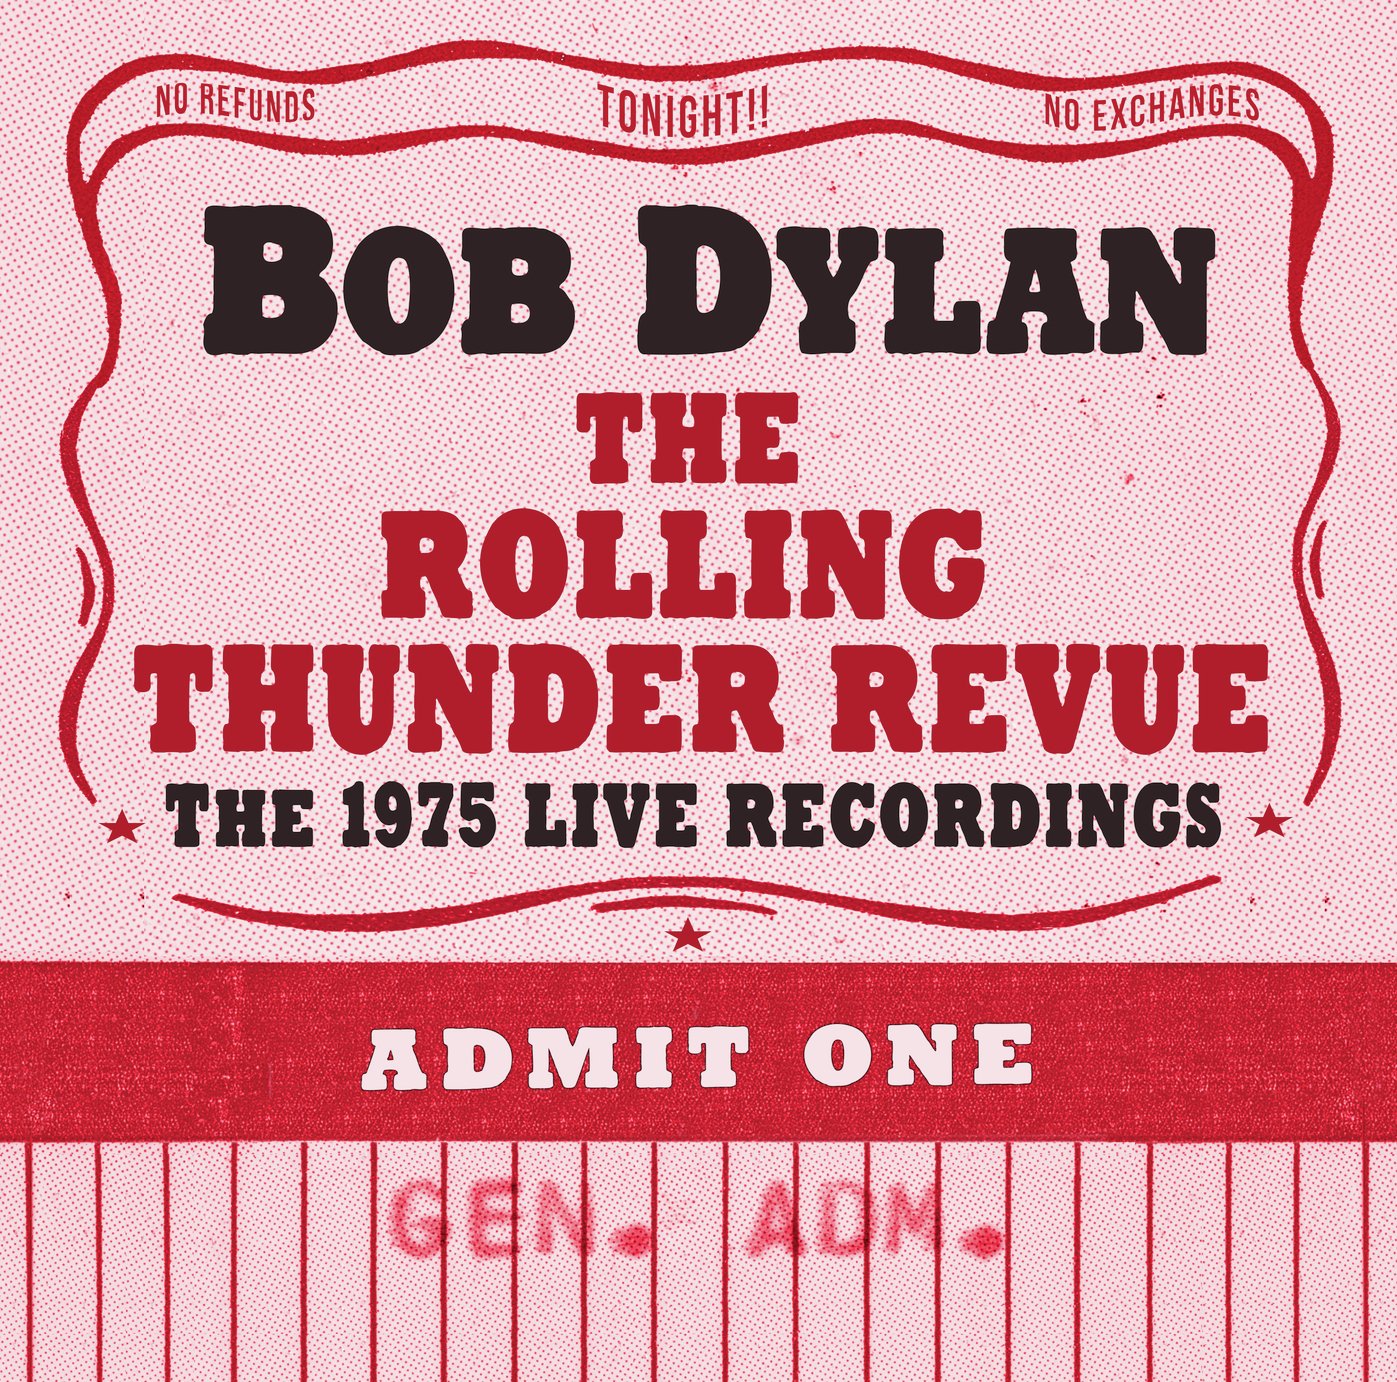 Bob Dylan The Rolling Thunder Review CD Collection Review